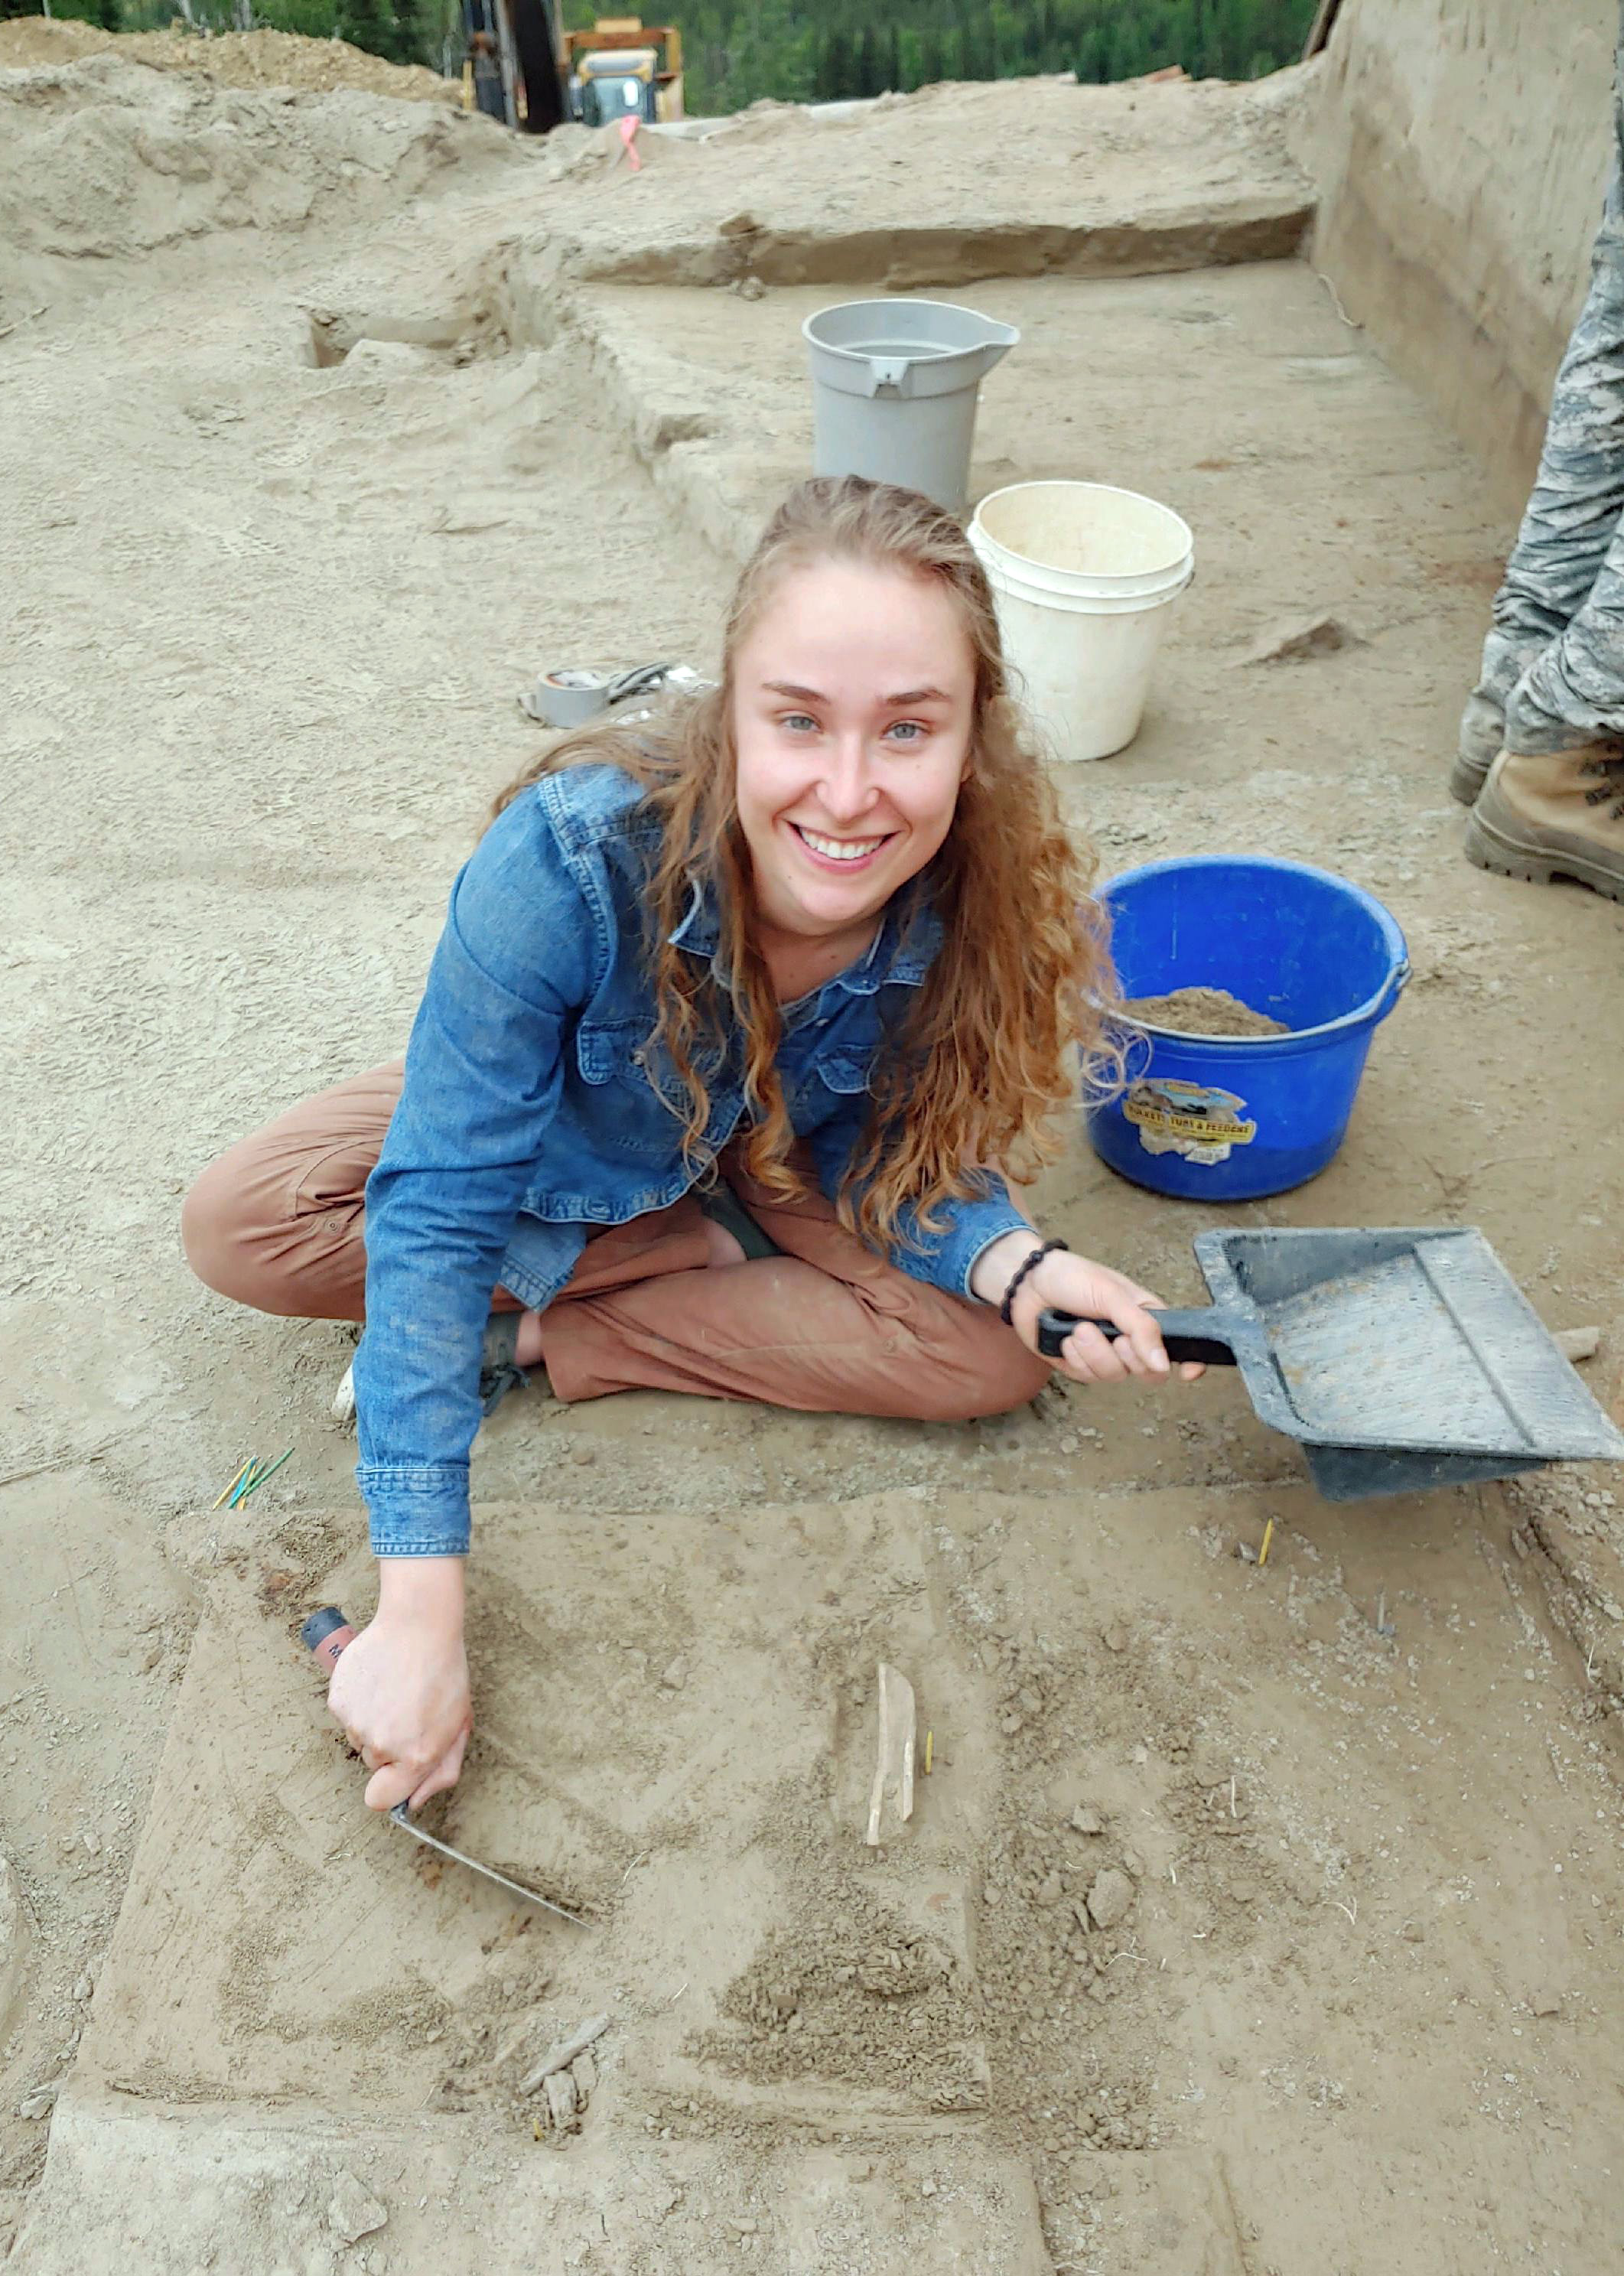 UAF Ph.D. student Audrey Rowe works on a project near the Swan Point archaeological site, where a mammoth tusk she studied was found.